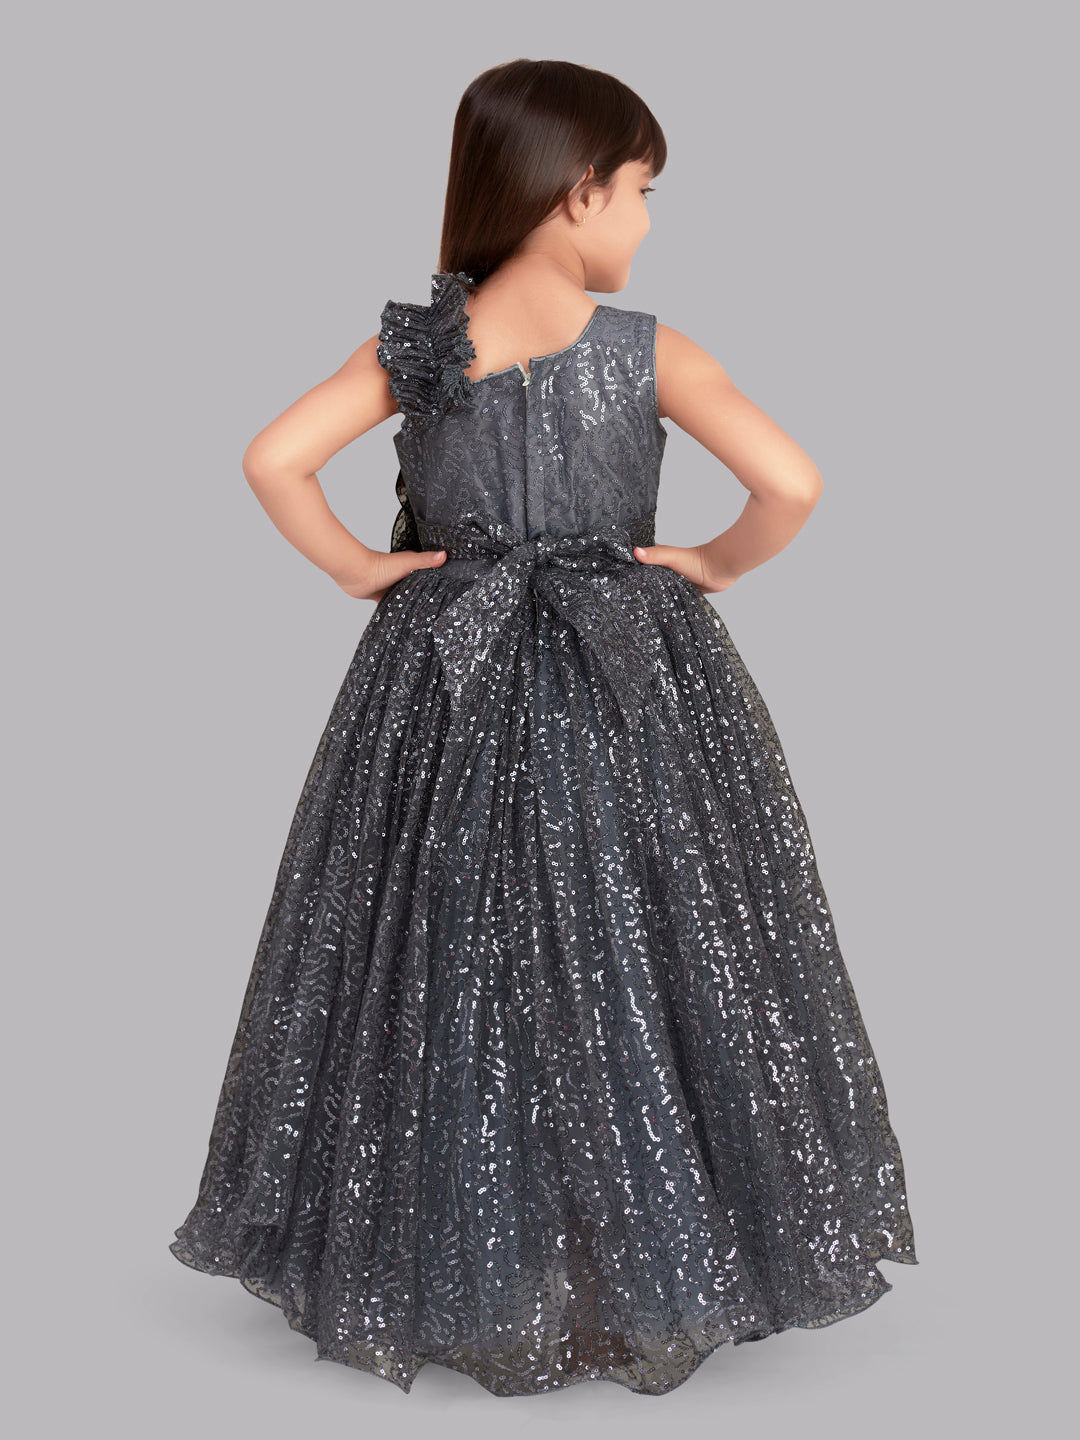 DAISY SEQUIN GOWN - SILVER - Scanlan Theodore